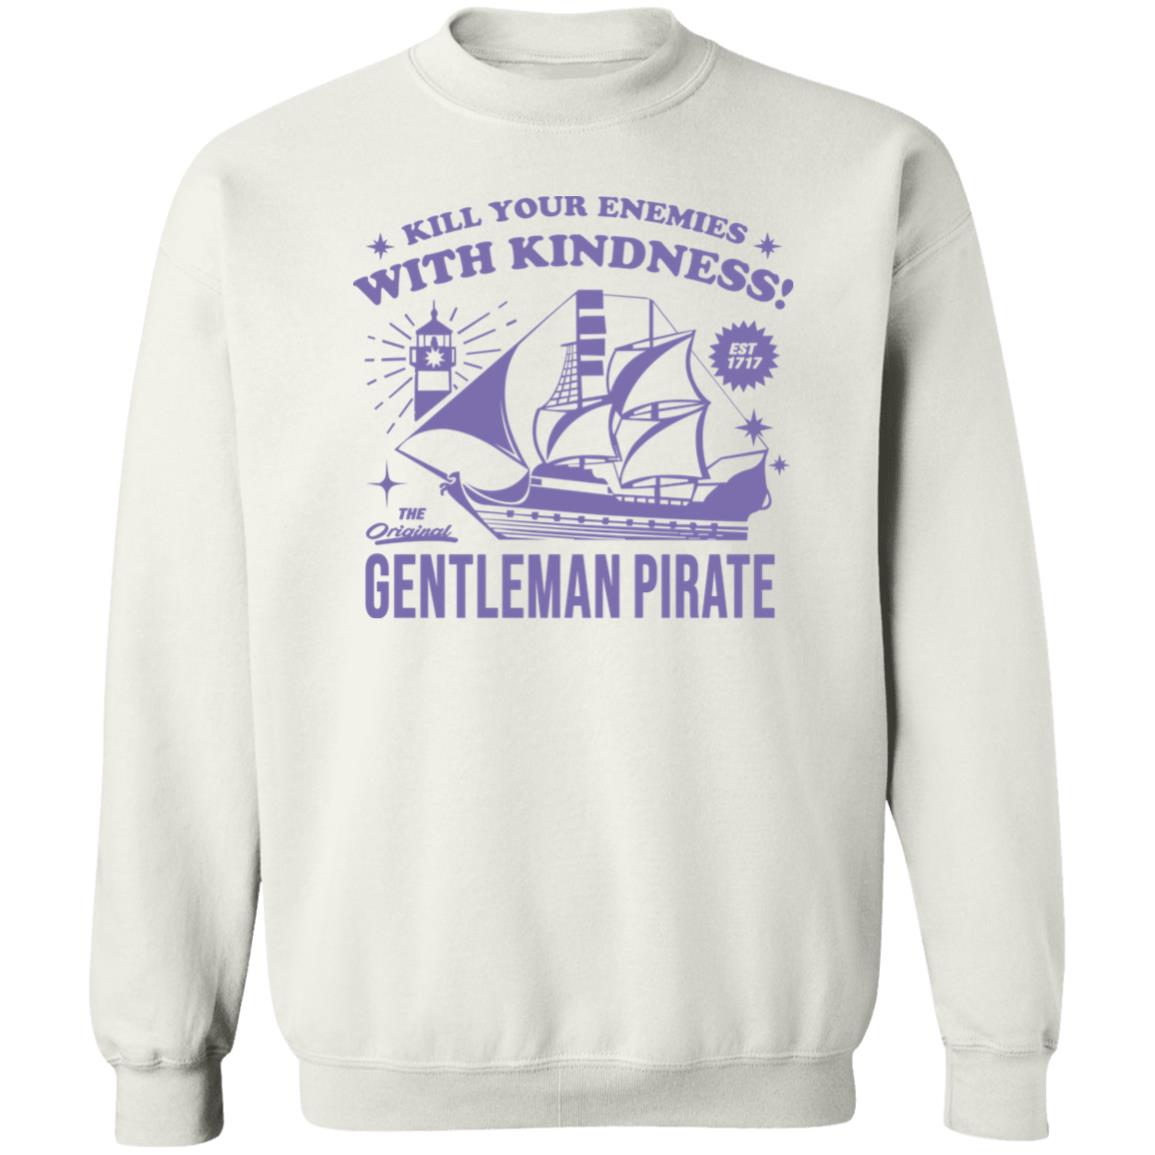 Kill Your Enemies With Kindness Gentleman Pirate Shirt 2